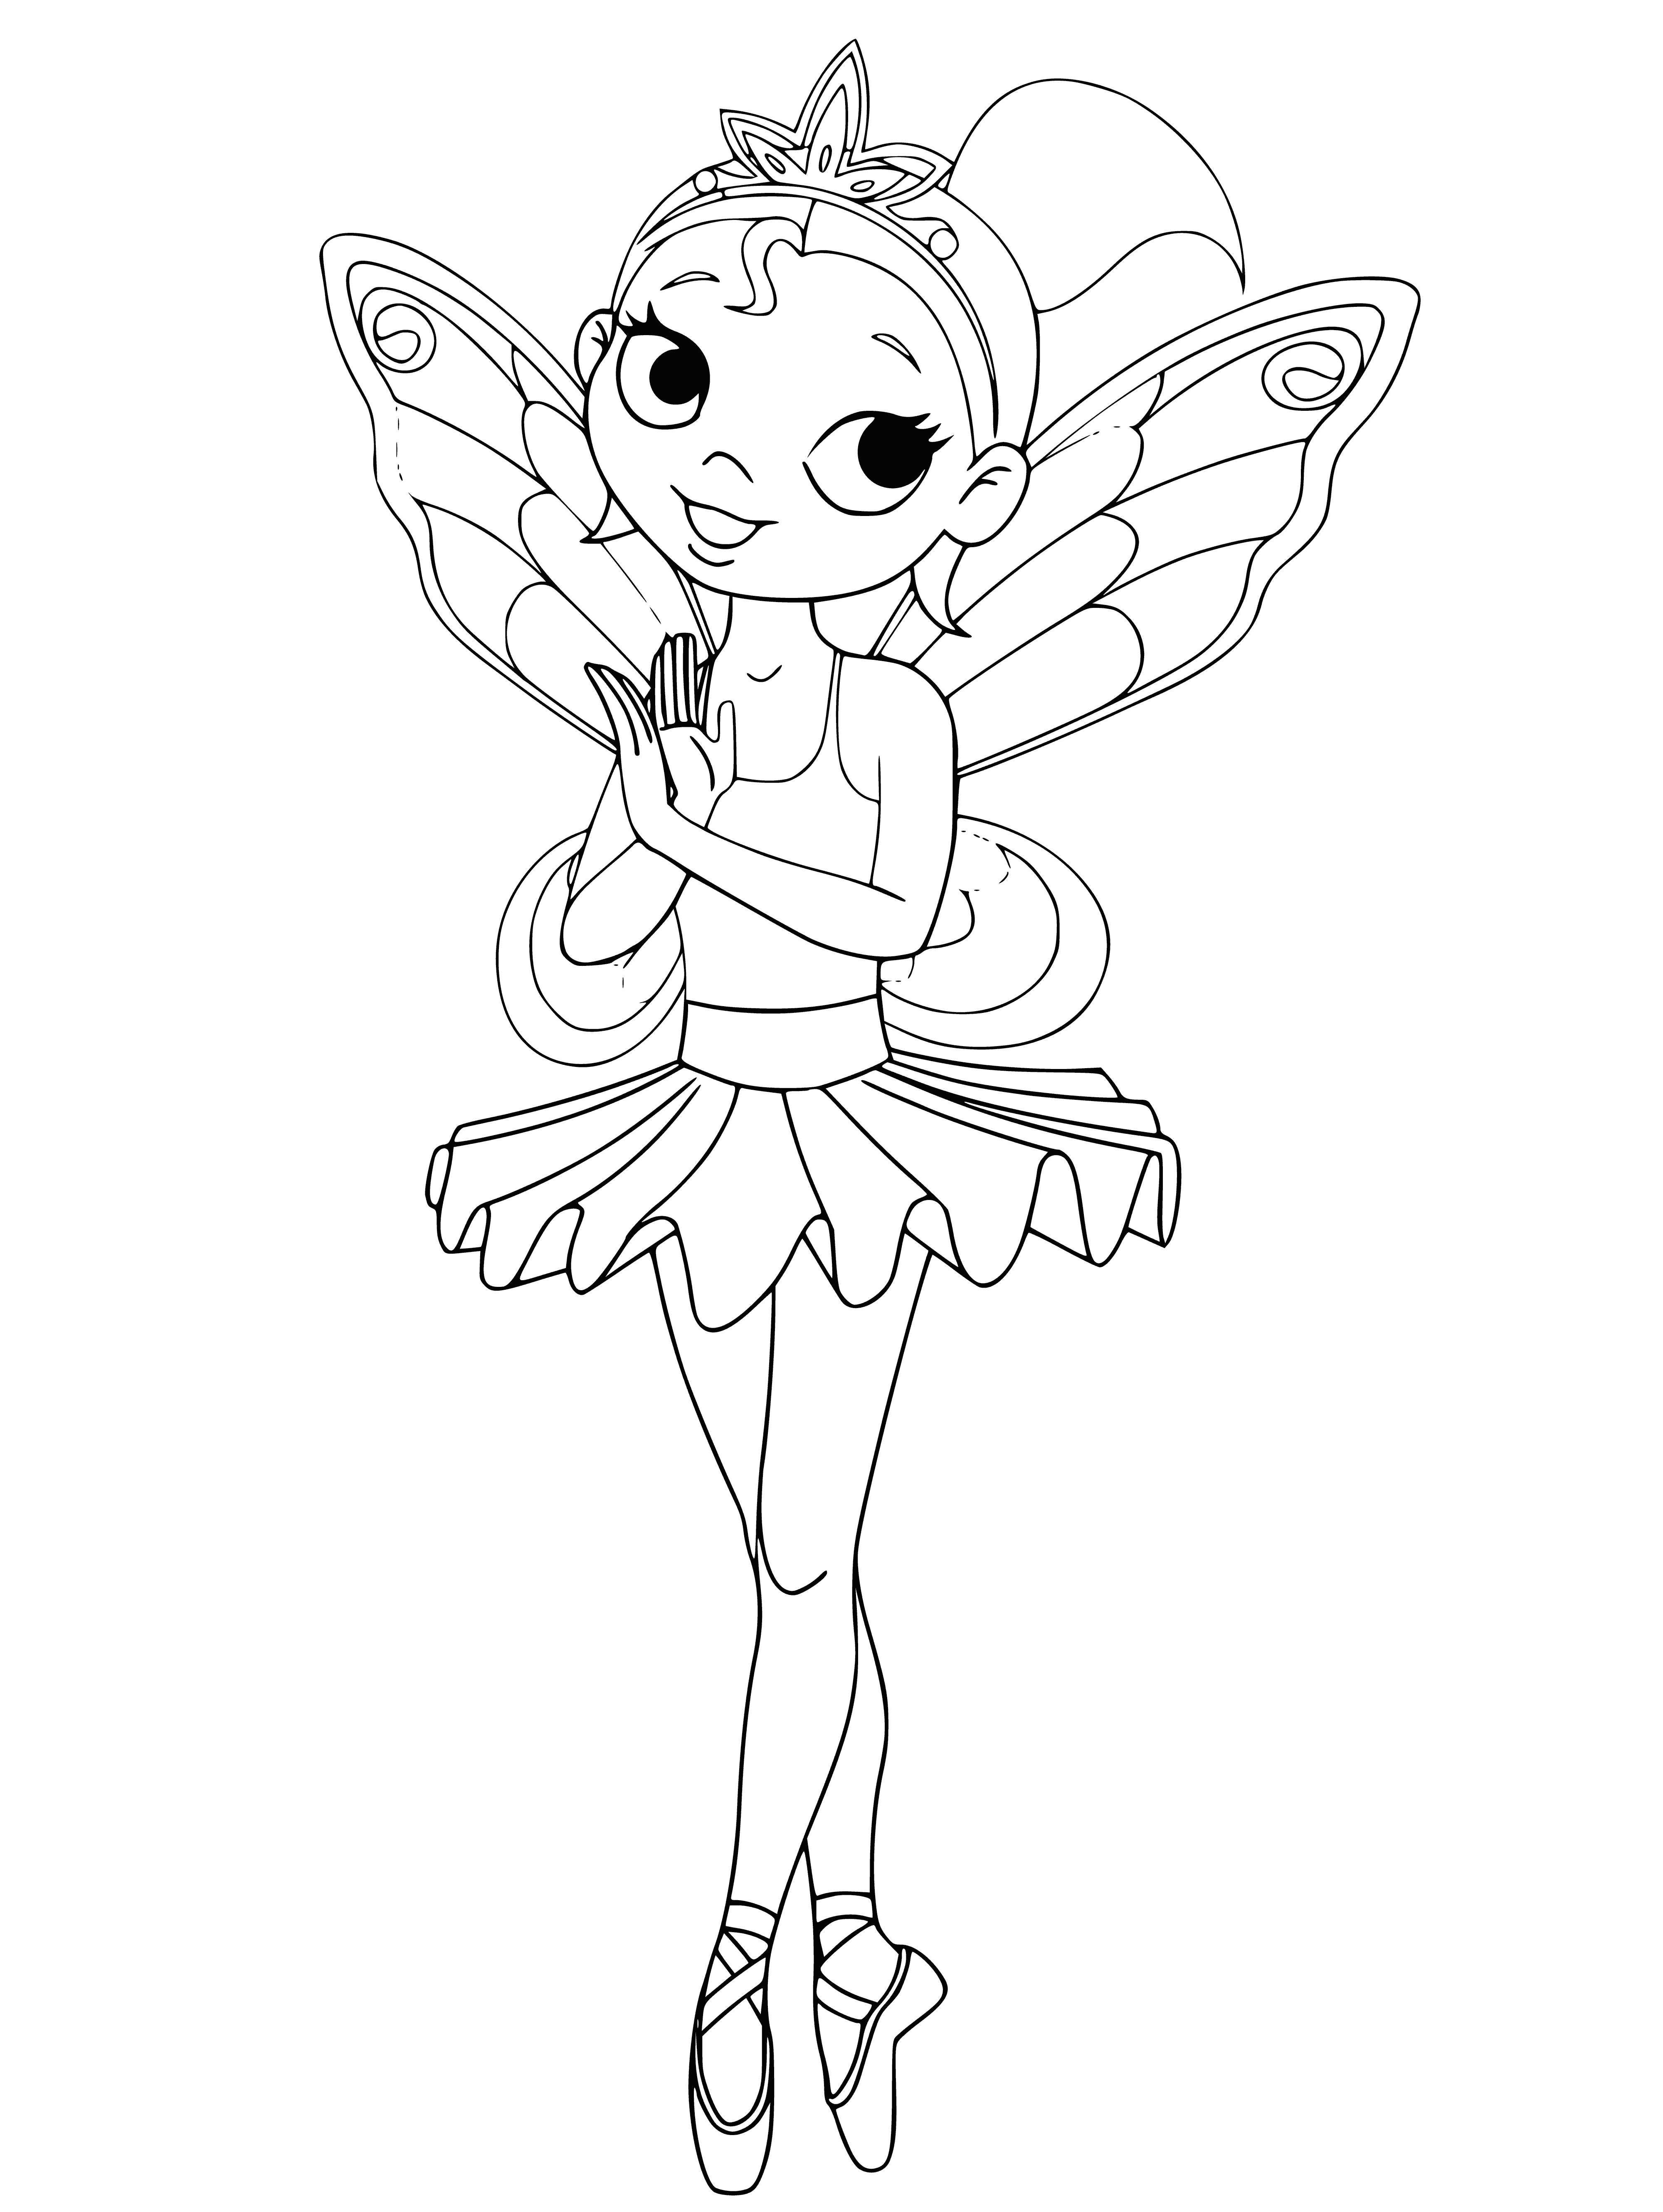 Ballerina girl coloring page